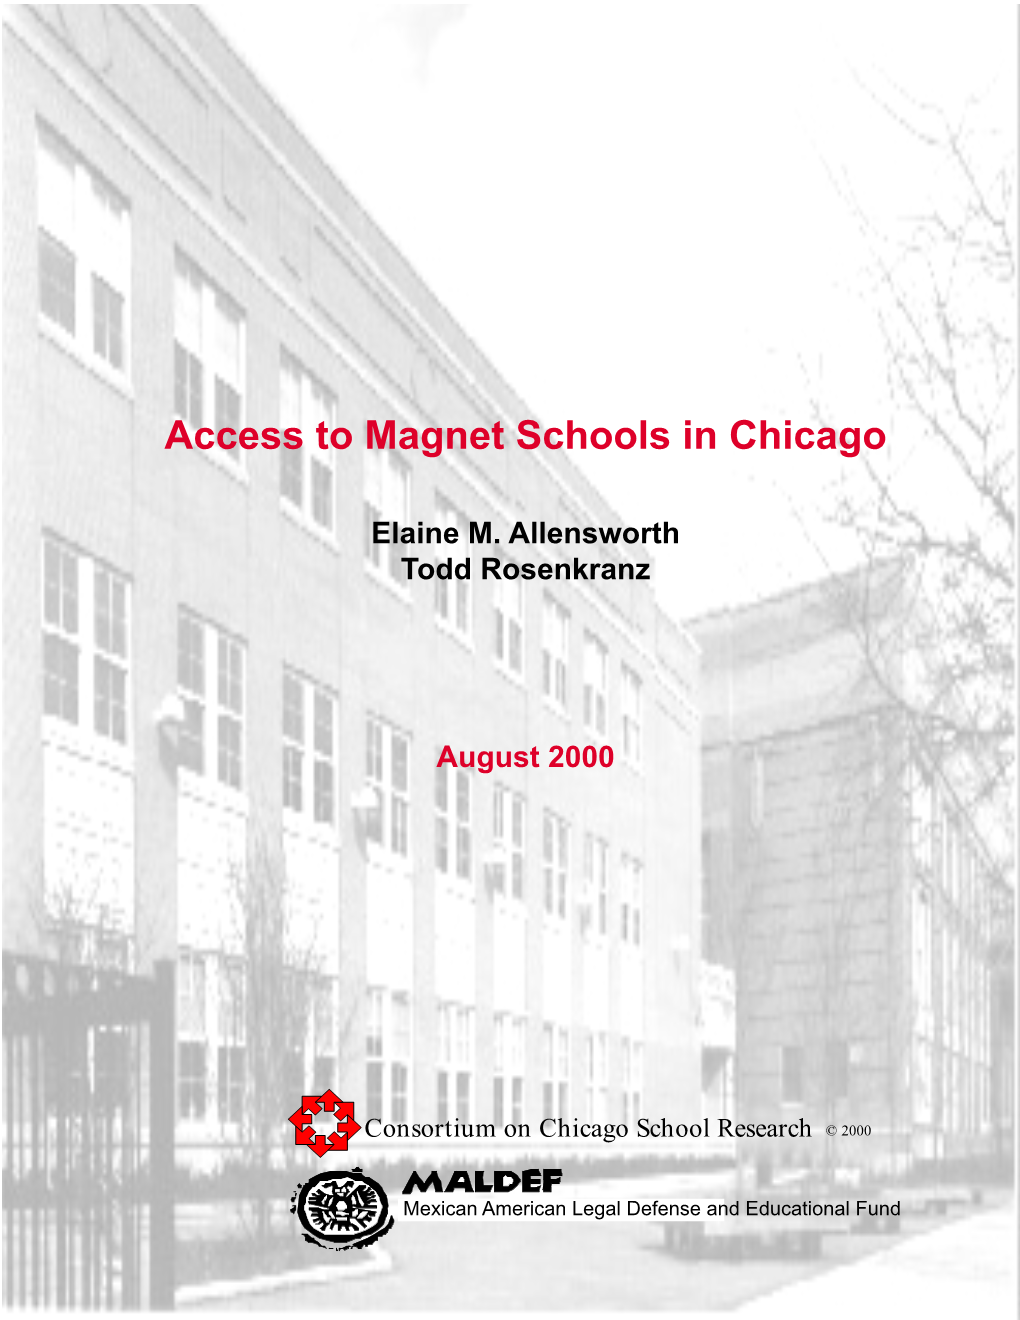 Access to Magnet Schools in Chicago